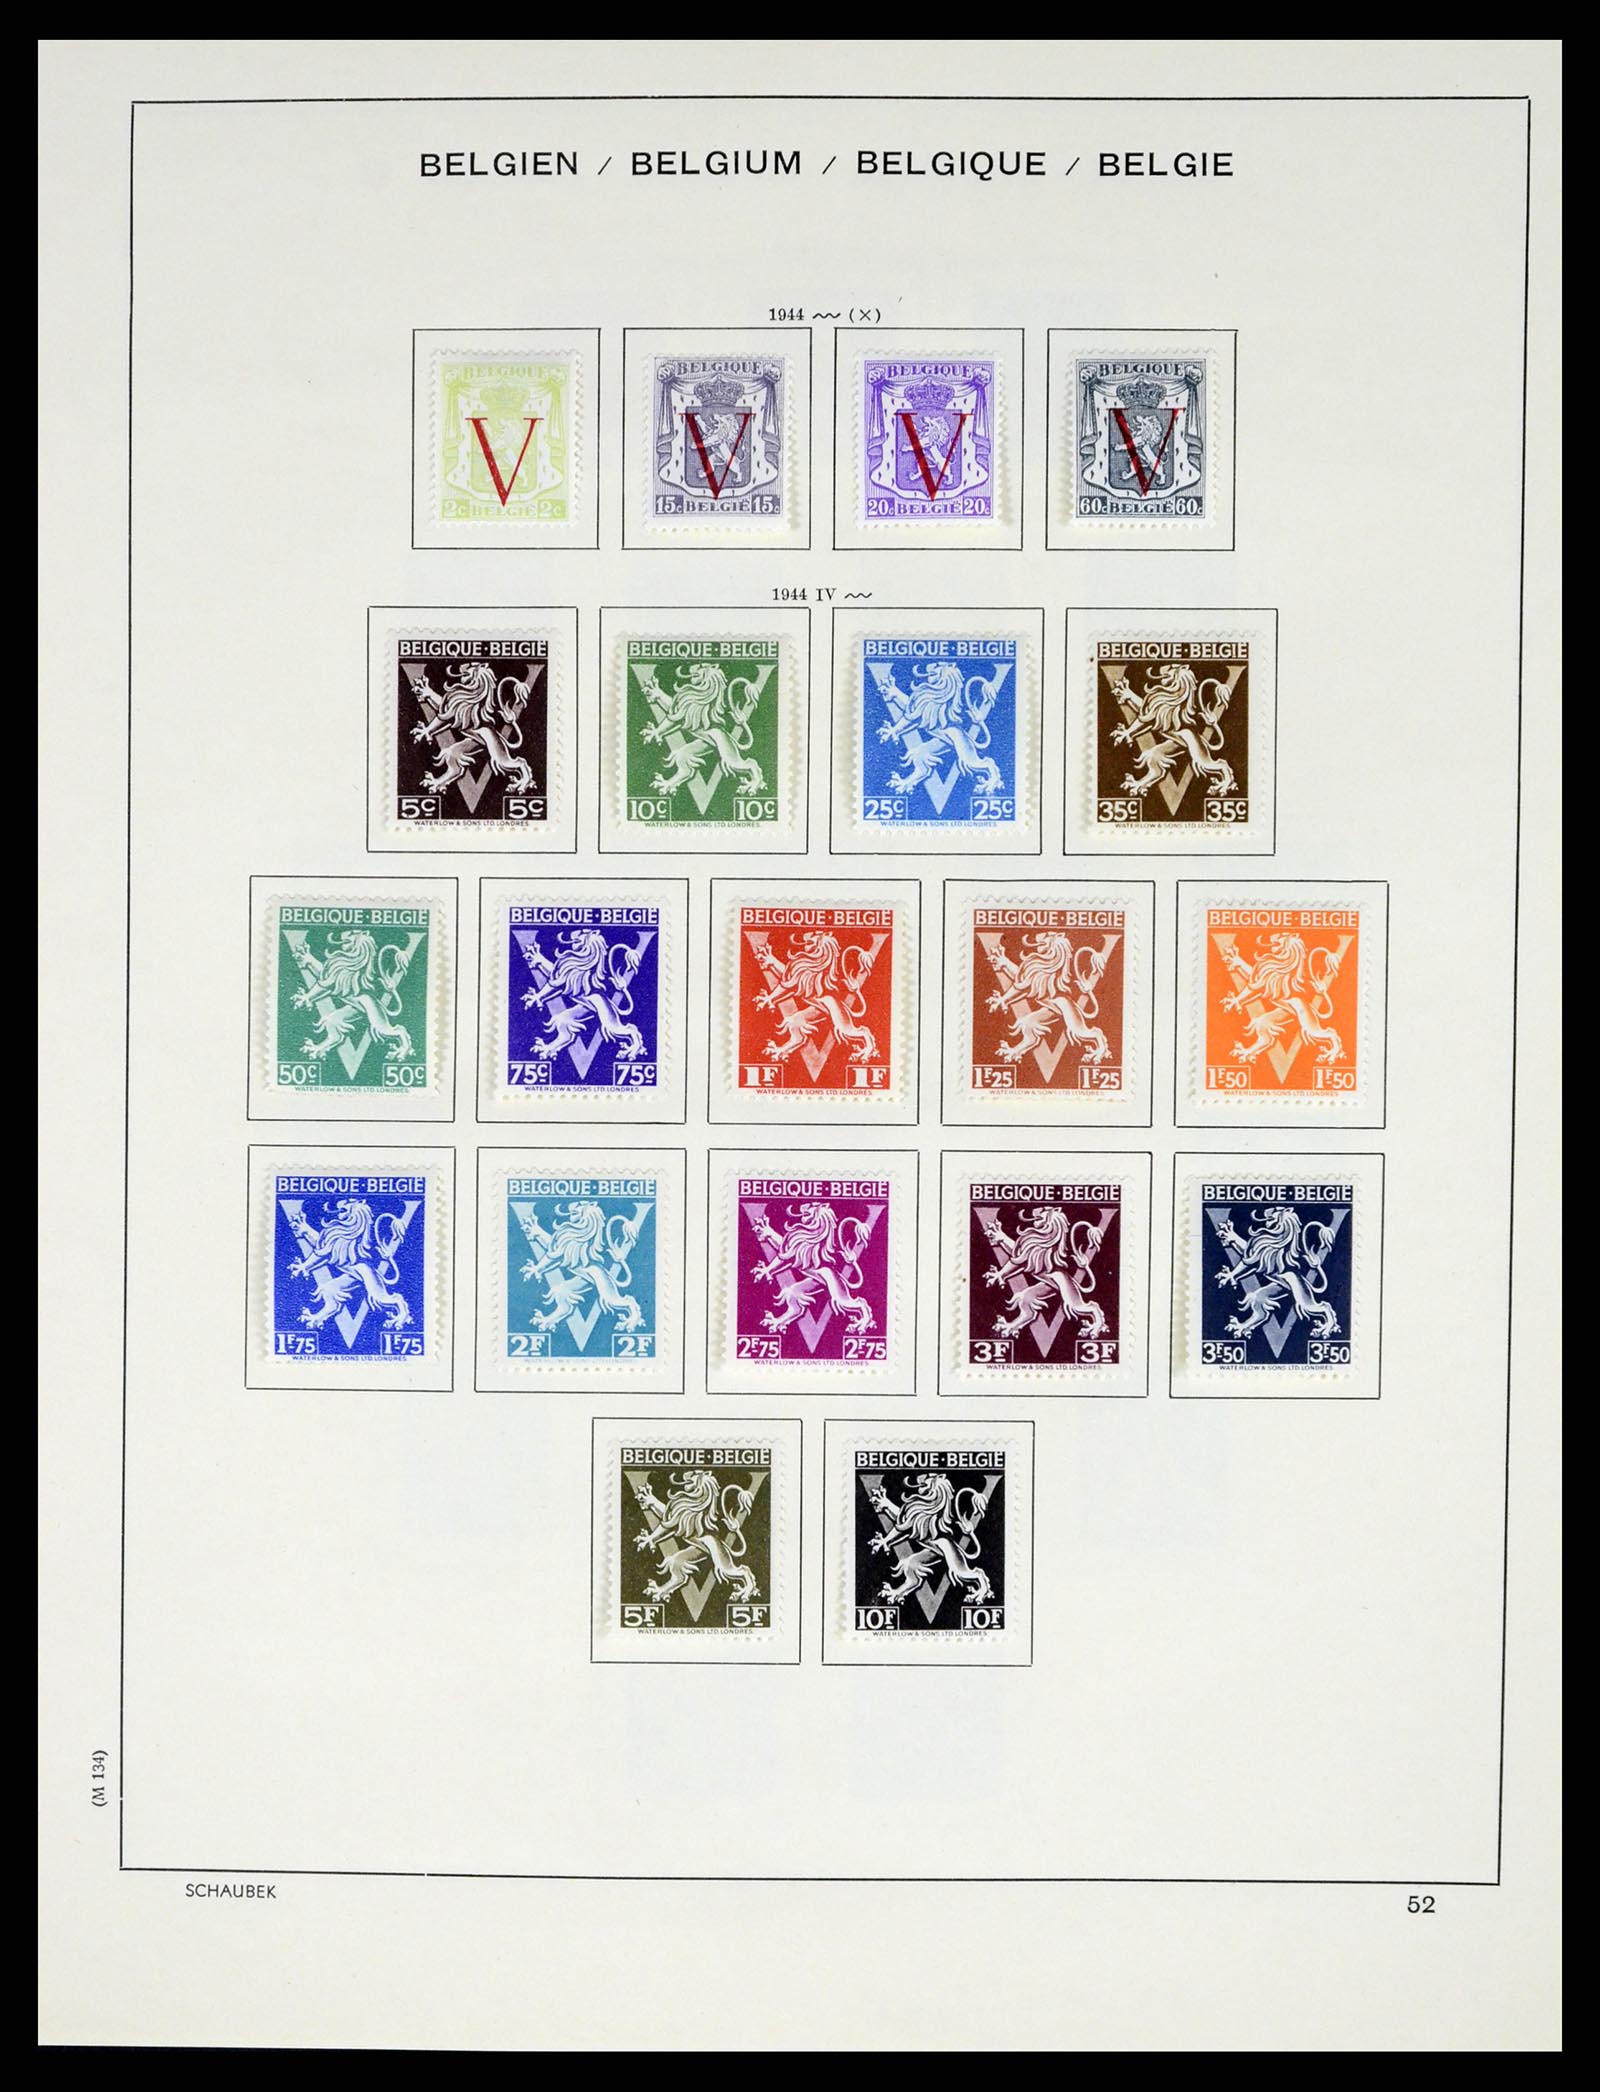 37595 059 - Stamp collection 37595 Super collection Belgium 1849-2015!